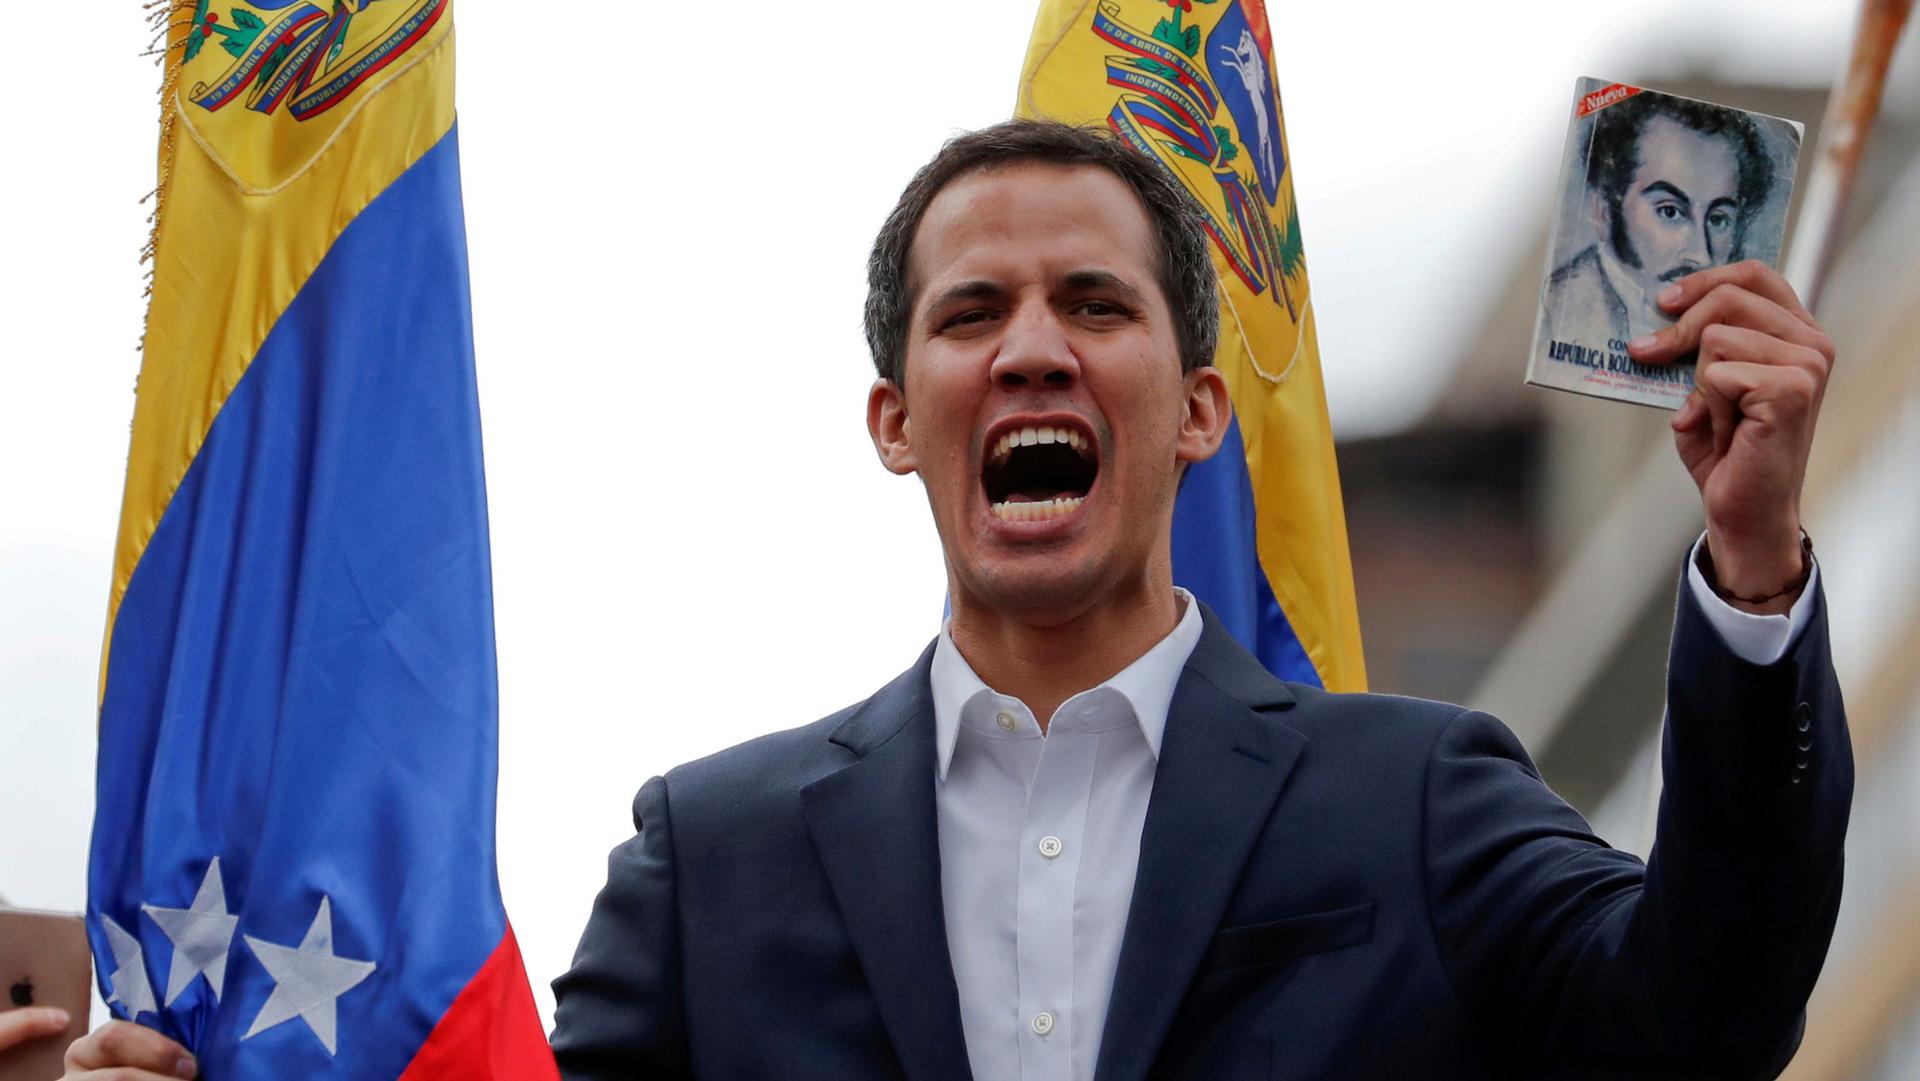 Juan Guaido is shown in a suit jacket and no tie while holding a copy of Venezuelan constitution during a rally in Caracas, Venezuela.